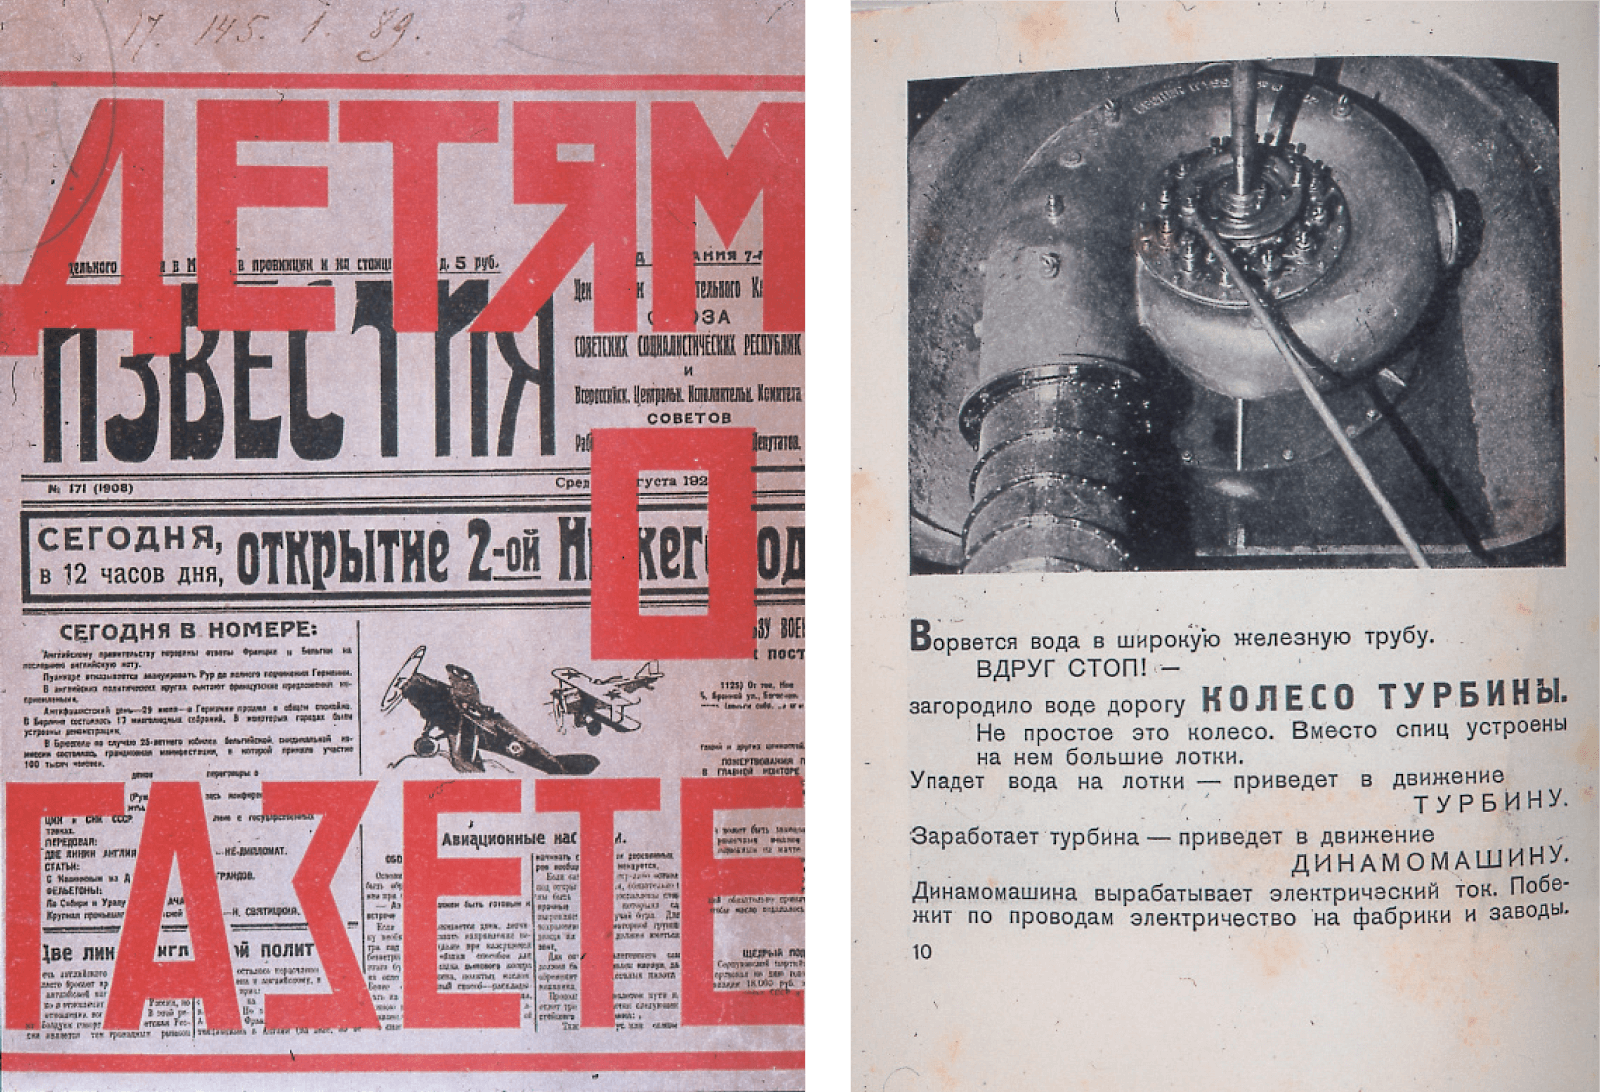 Two images from Soviet children’s books. One depicts the cover of the 1926 book “The Newspaper Explained to Children,” and the other an illustration for the 1930 book “Dnipro River Hydroelectric Station.” The titles have been translated from the original Russian.